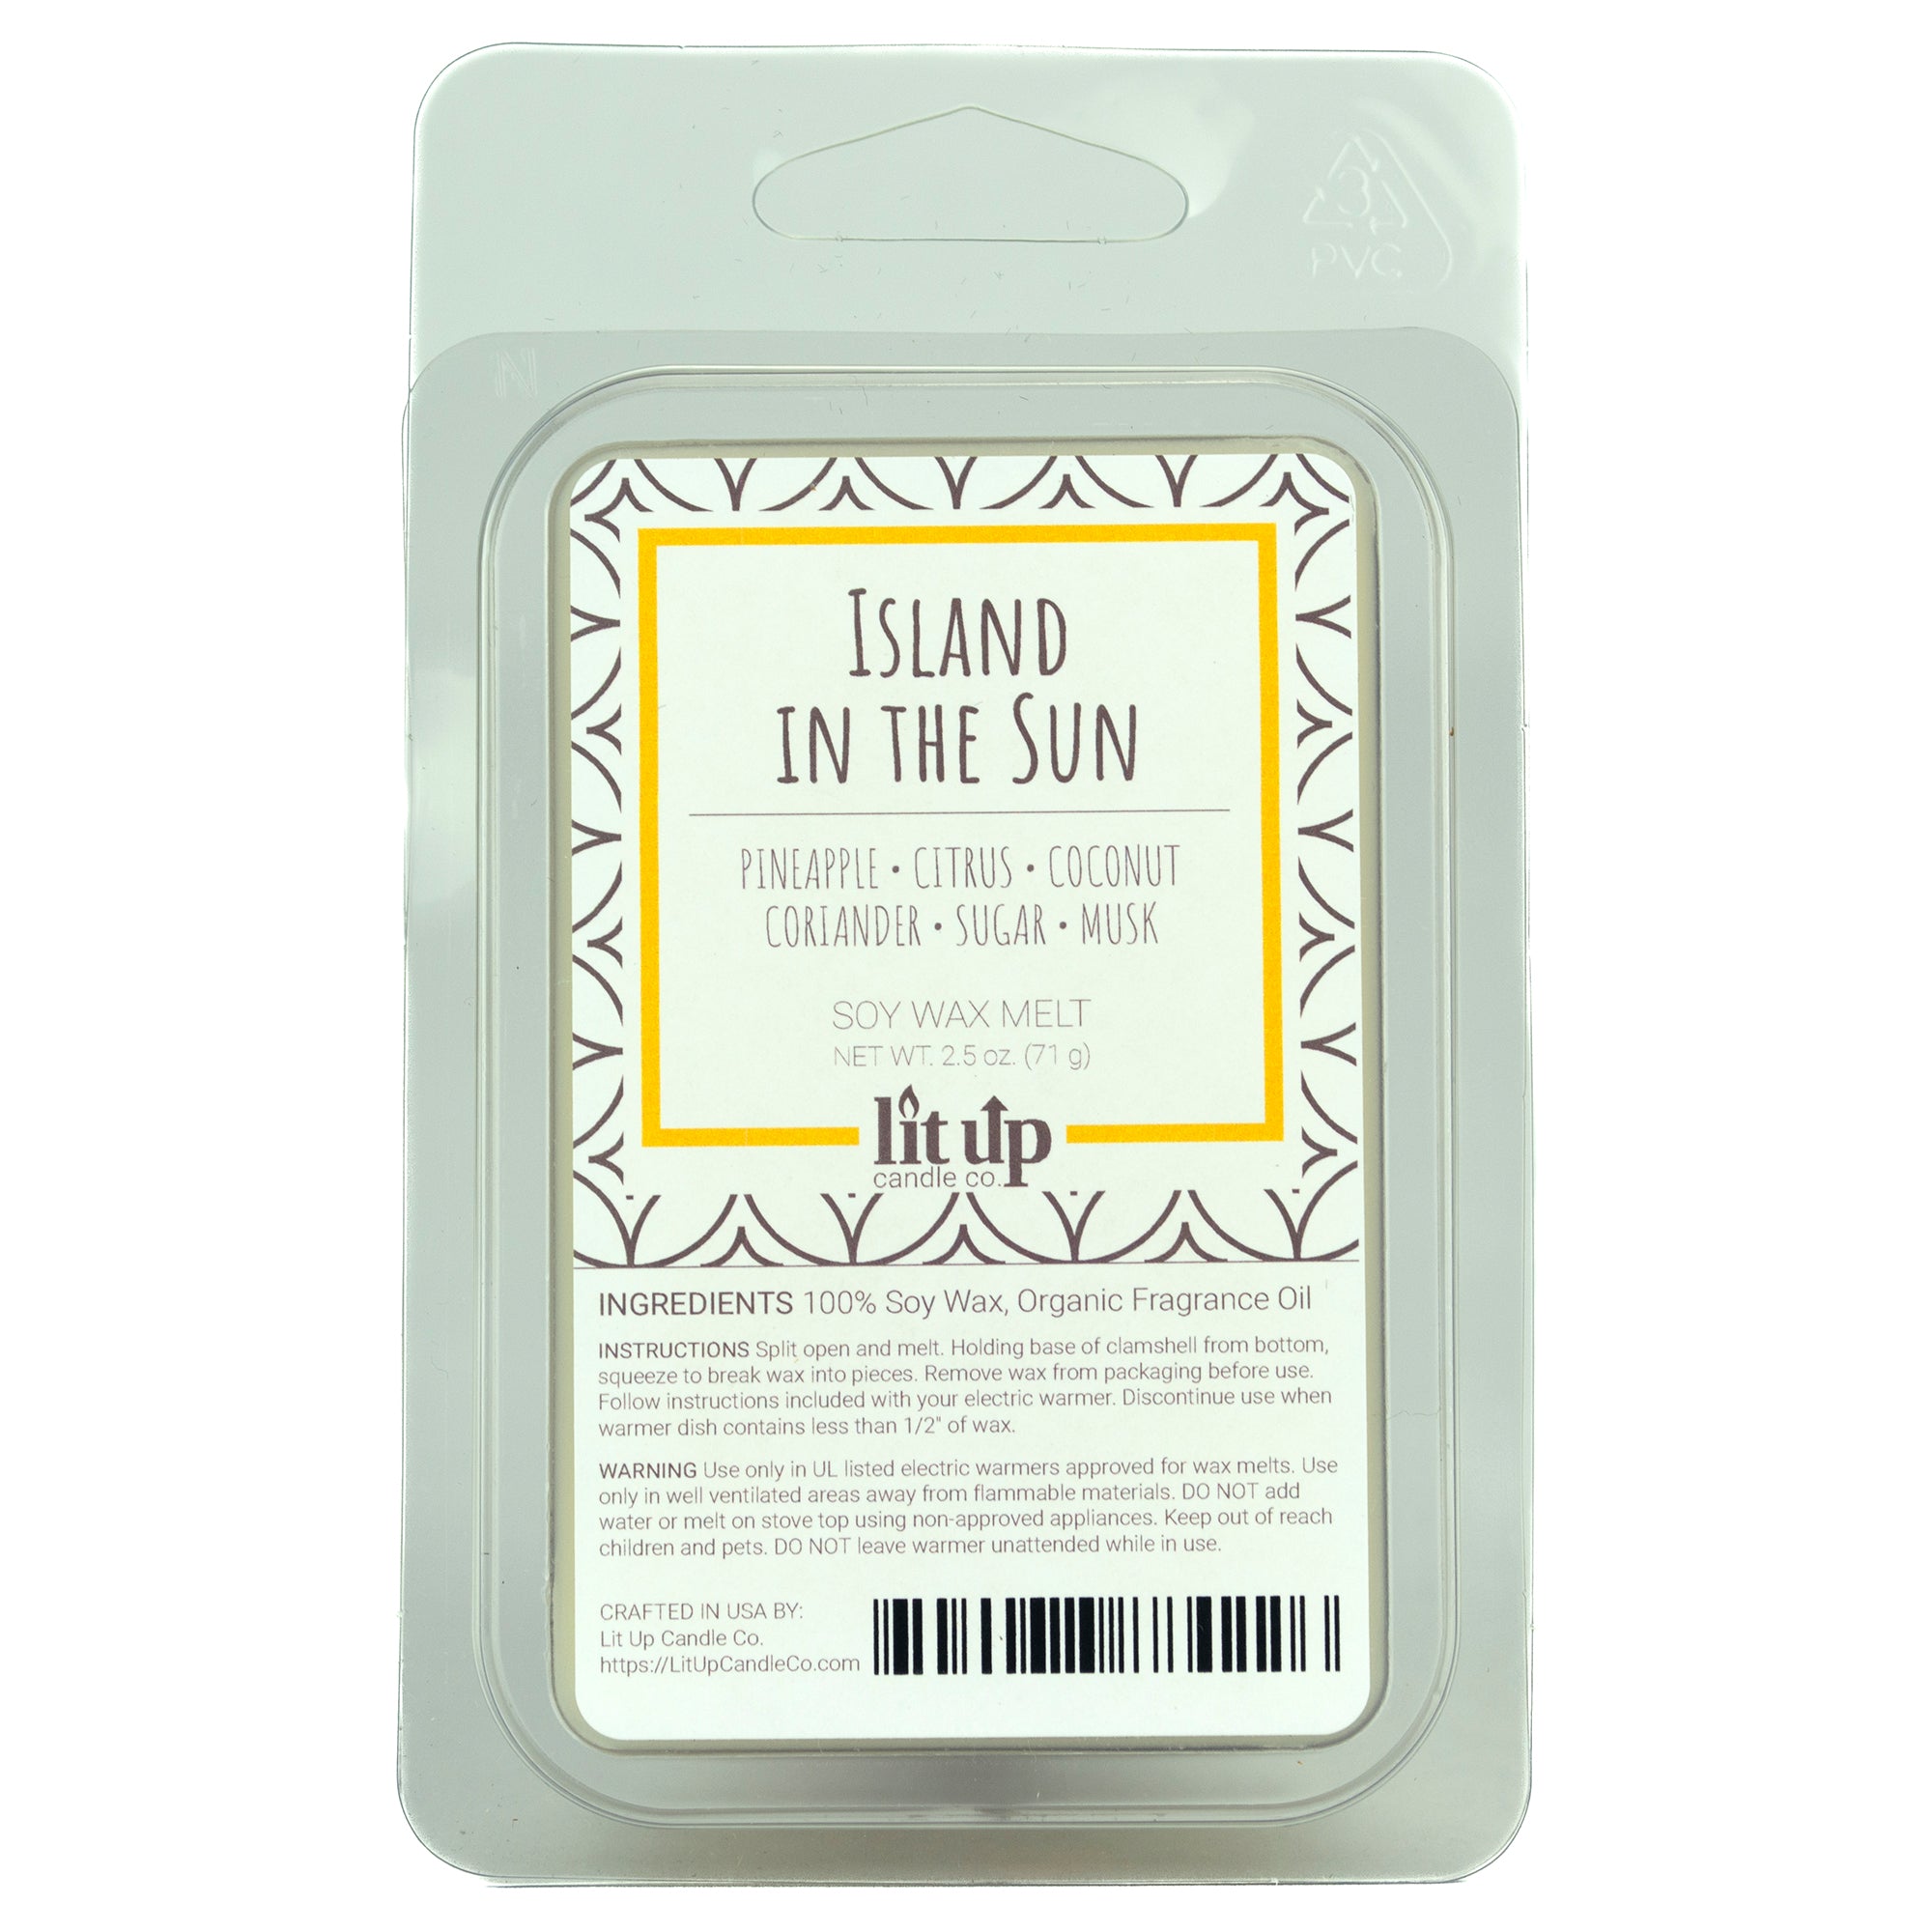 Island in the Sun scented 2.5 oz. soy wax melt - FKA Pineapple Cilantro